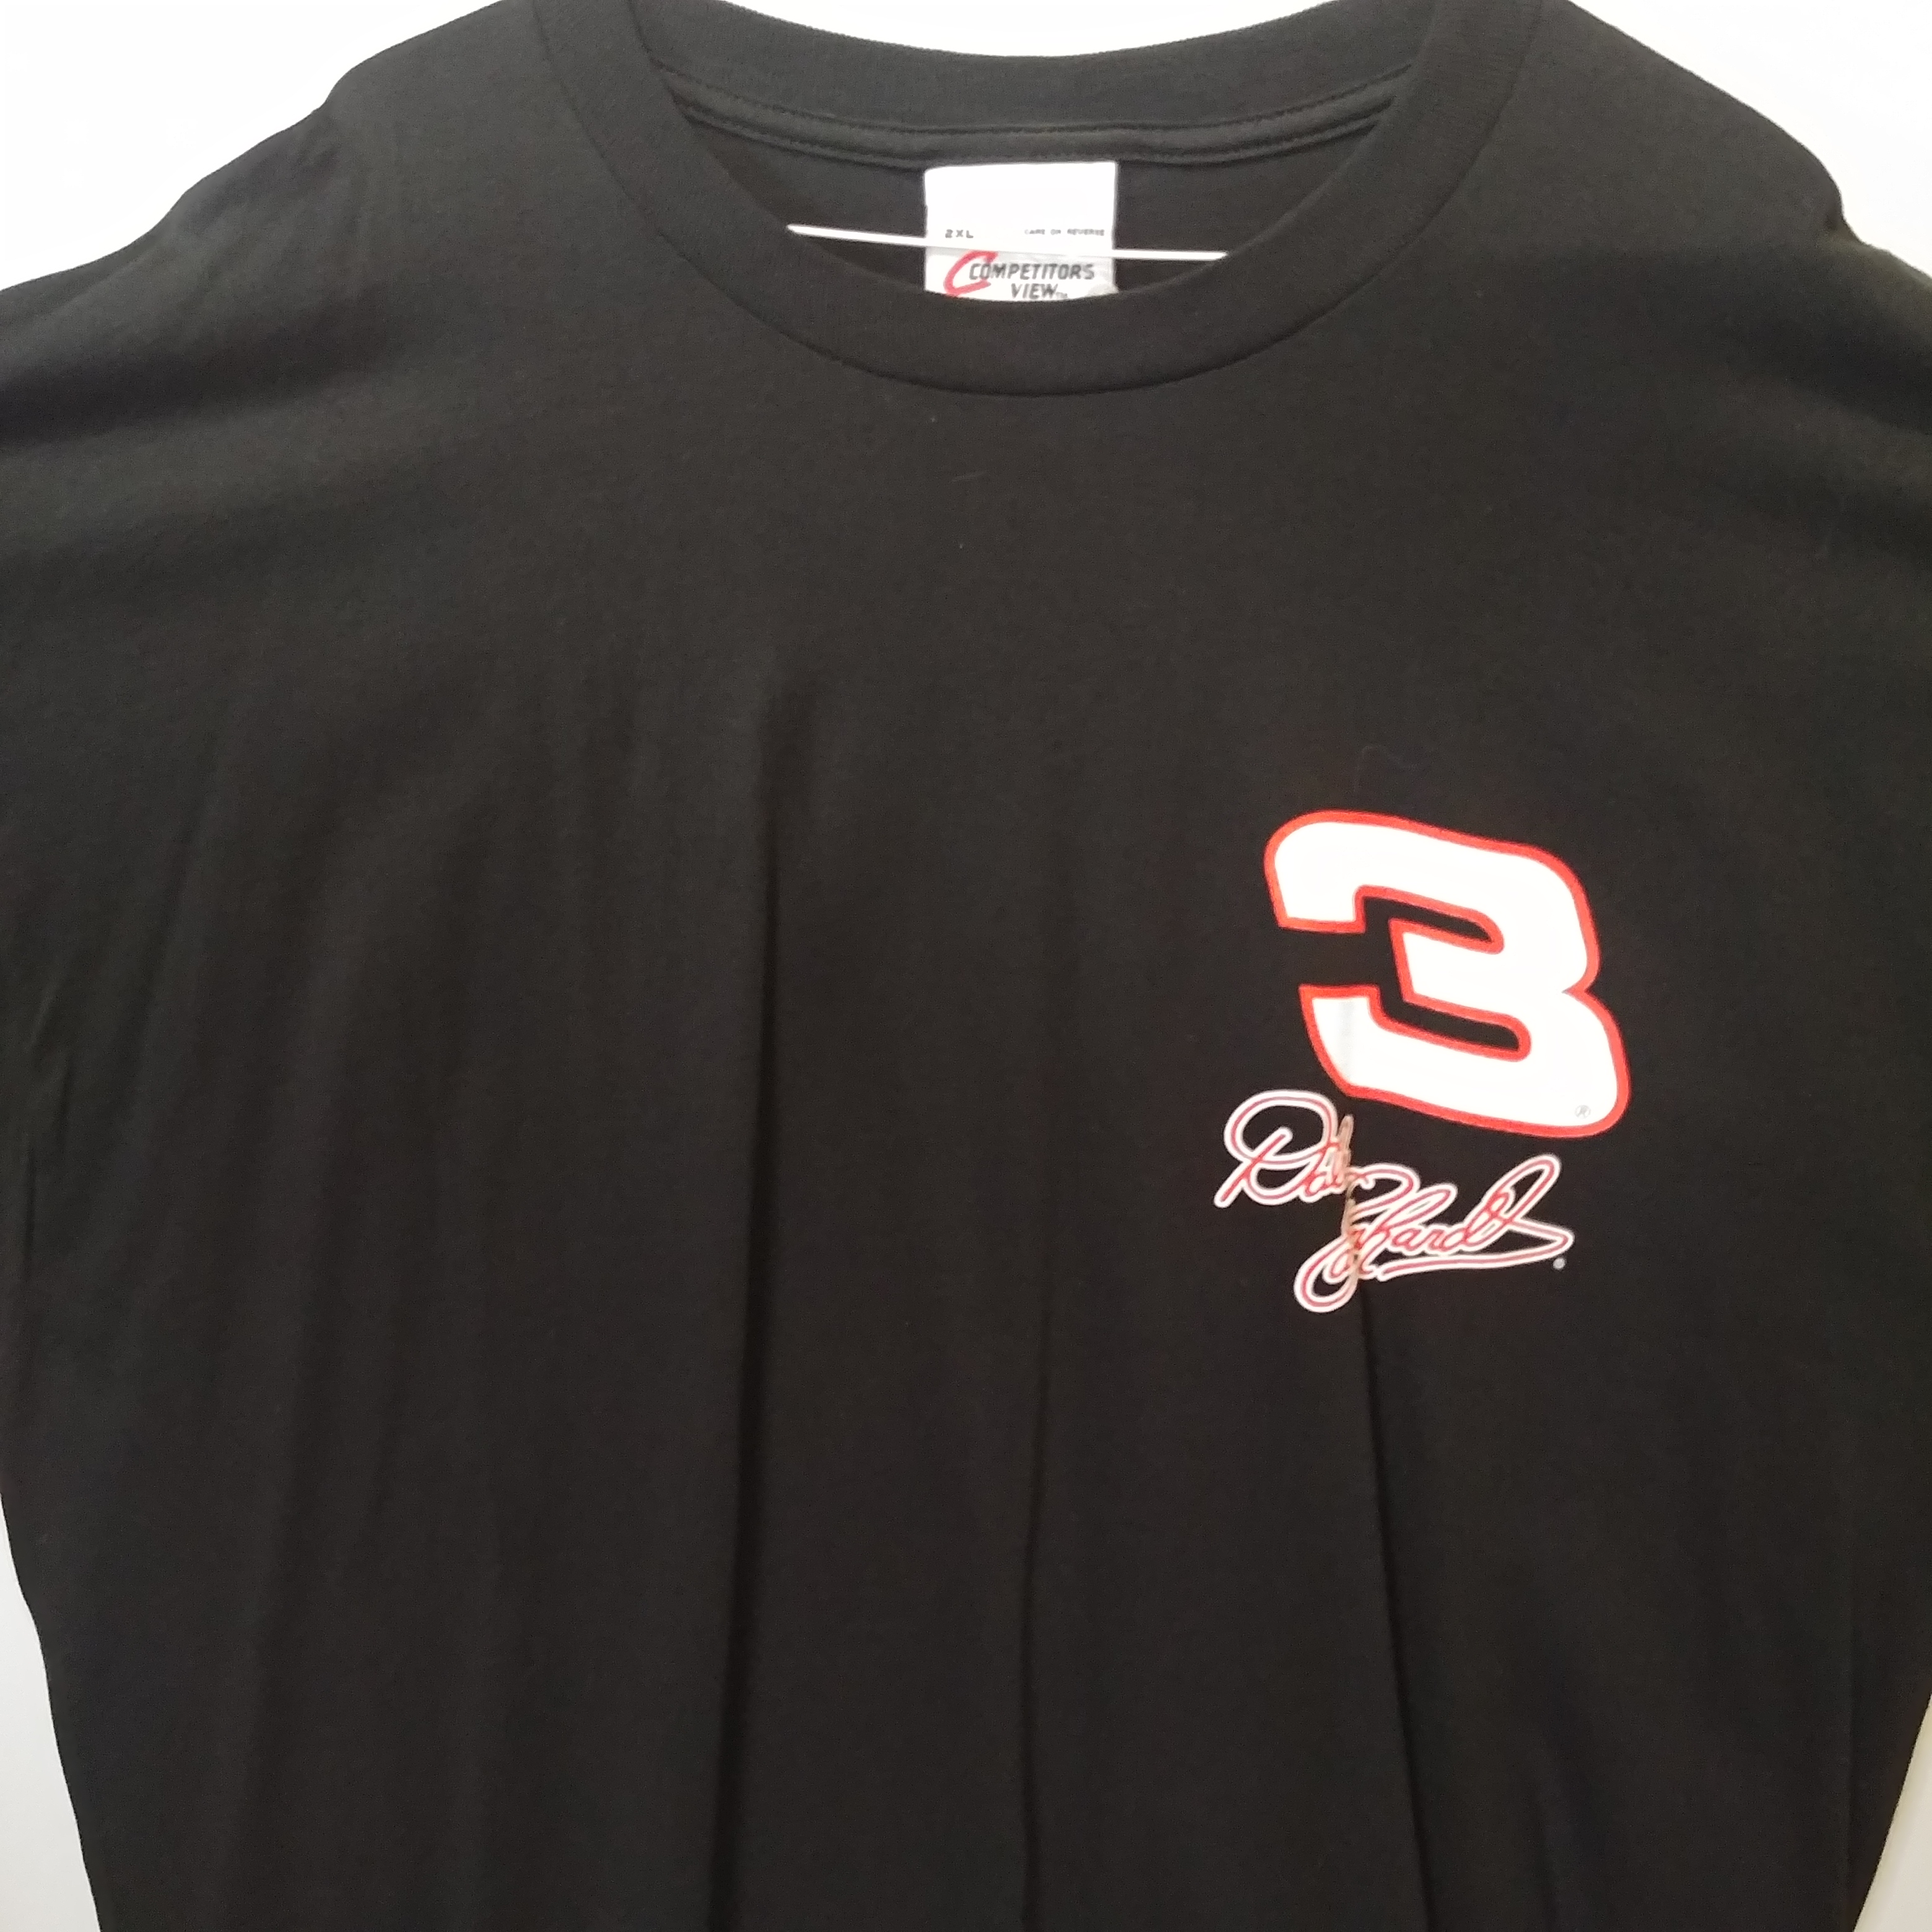 2001 Dale Earnhardt "Seven Time Champion" tee